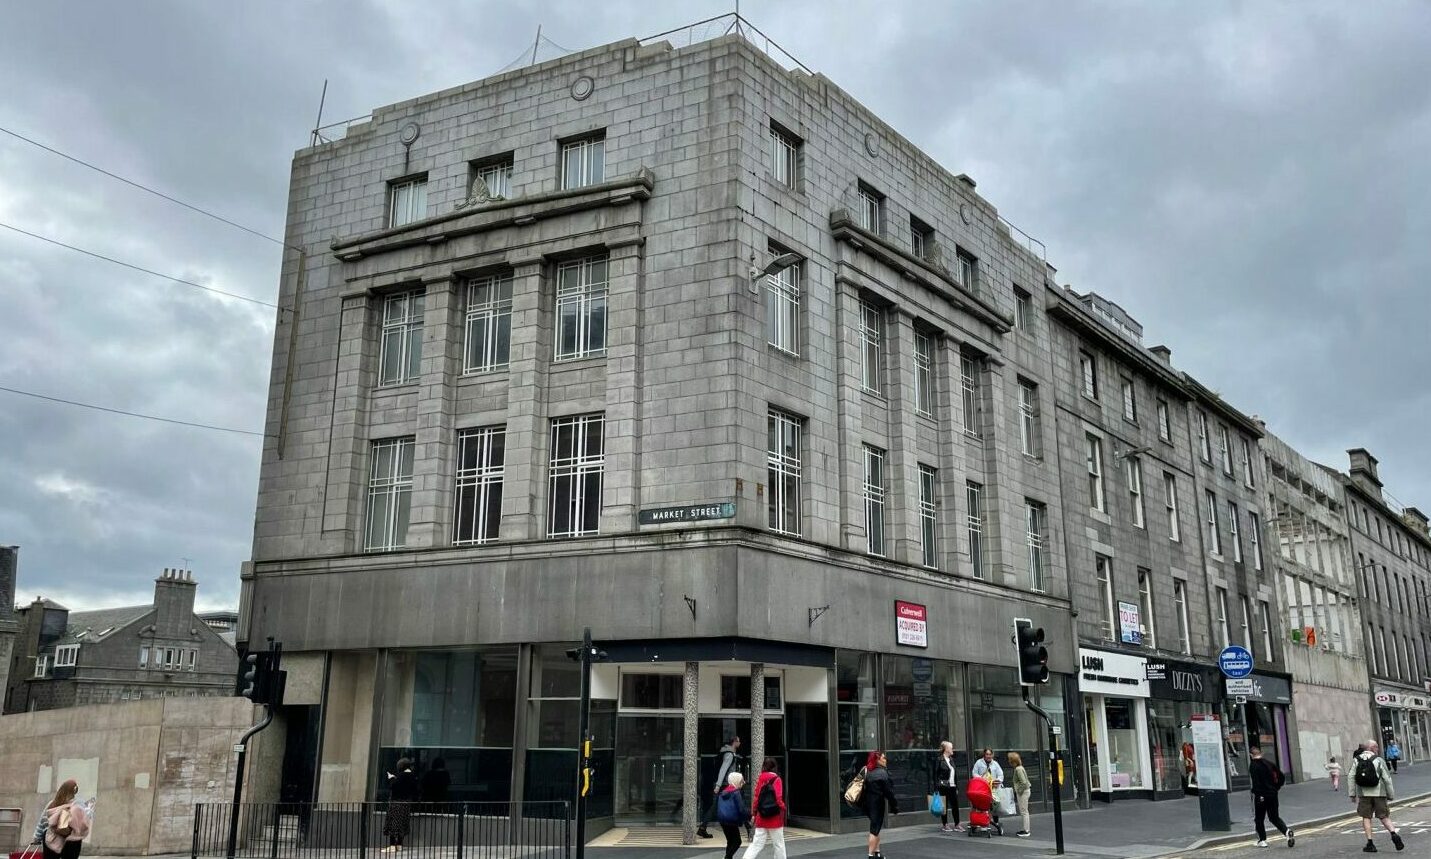 The former Caffe Nero in Aberdeen being taken over by Black Sheep Coffee